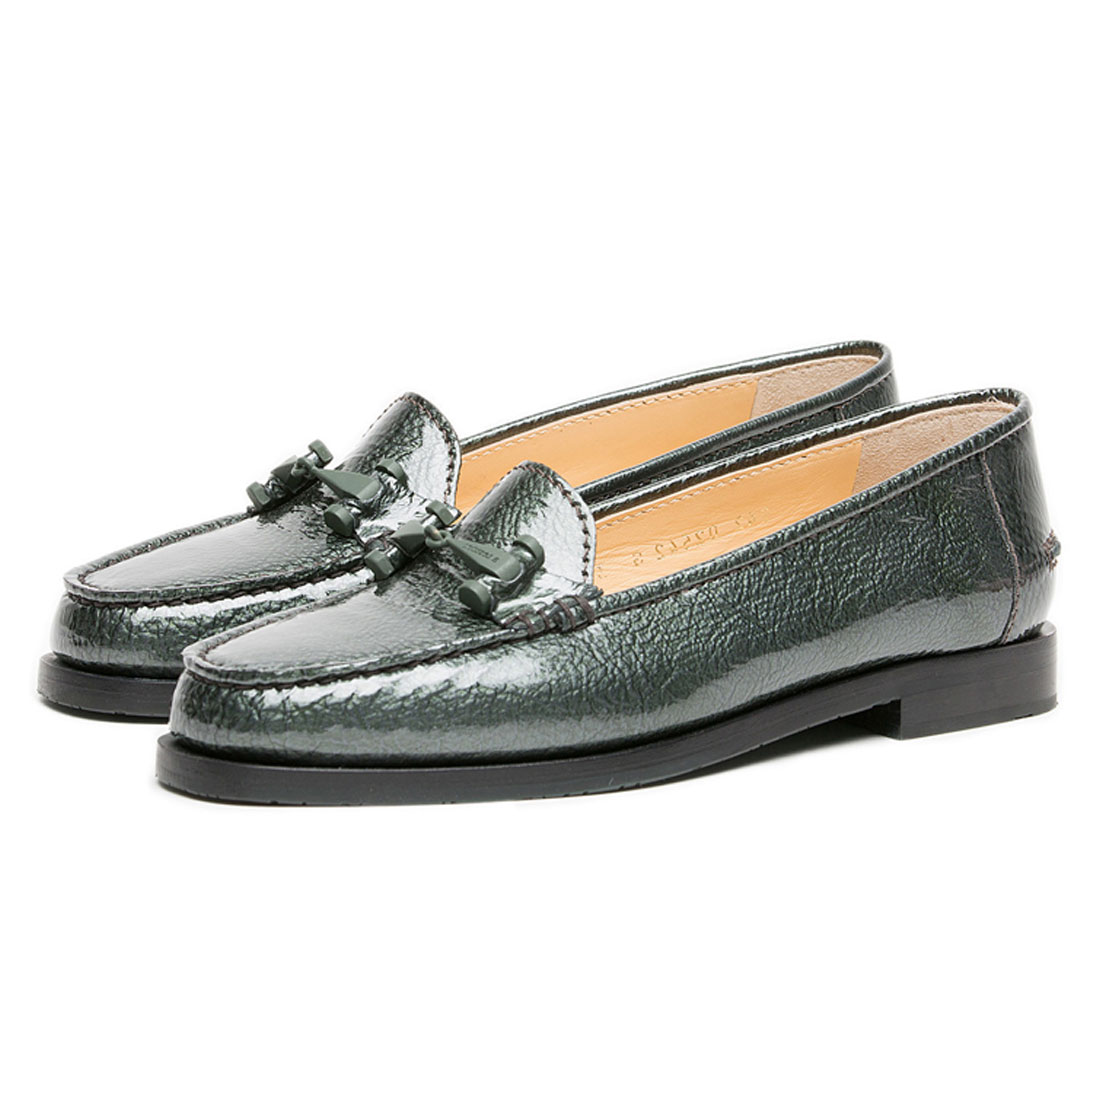 China reliable supplier women leather casual flat loafers shoes YH1195